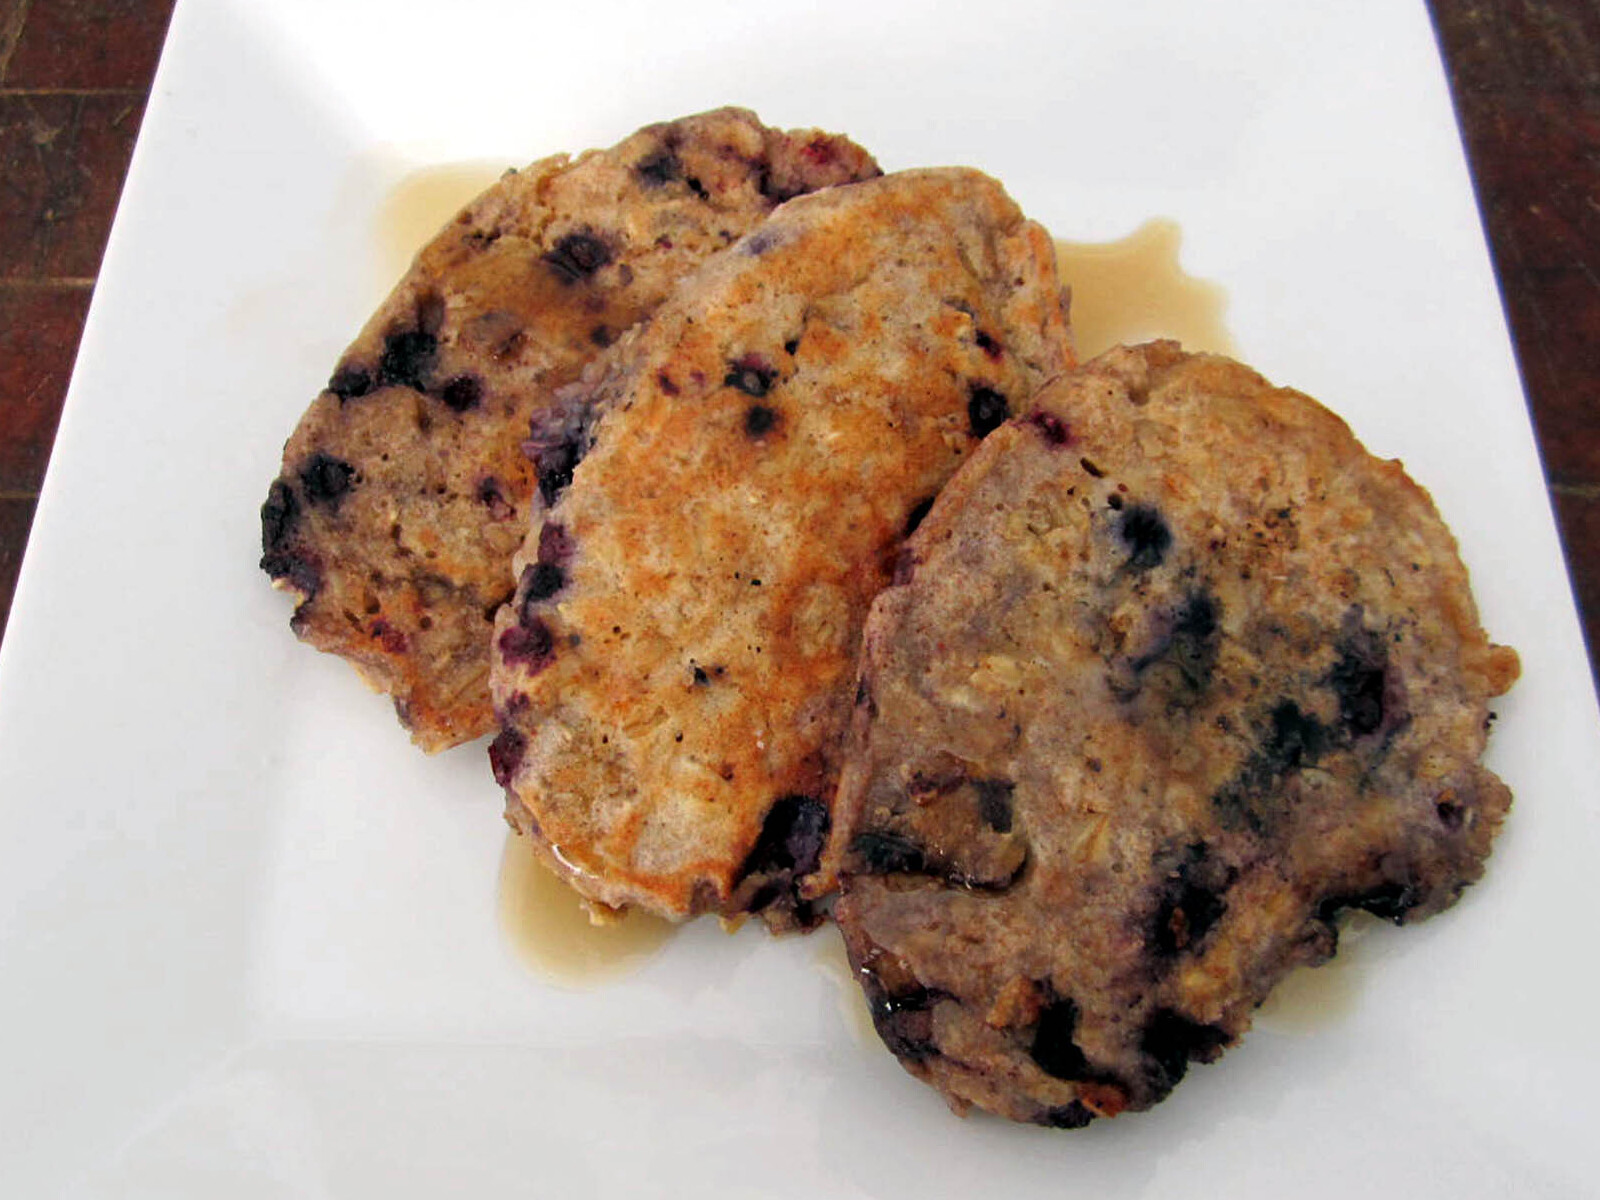 Three oat blueberry pancakes with maple syrup on a white plate